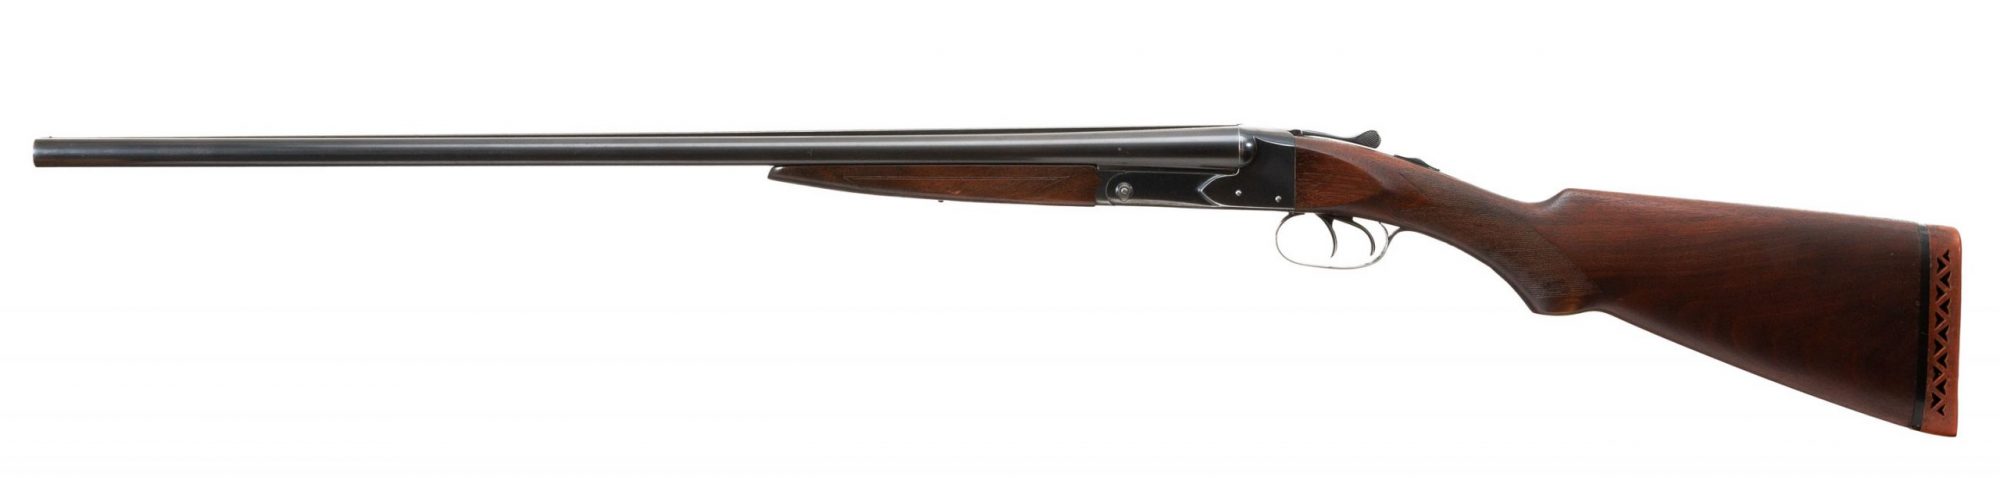 Photo of a pre-owned Winchester Model 21 20 gauge side by side shotgun, for sale as-is by Turnbull Restoration of Bloomfield, NY